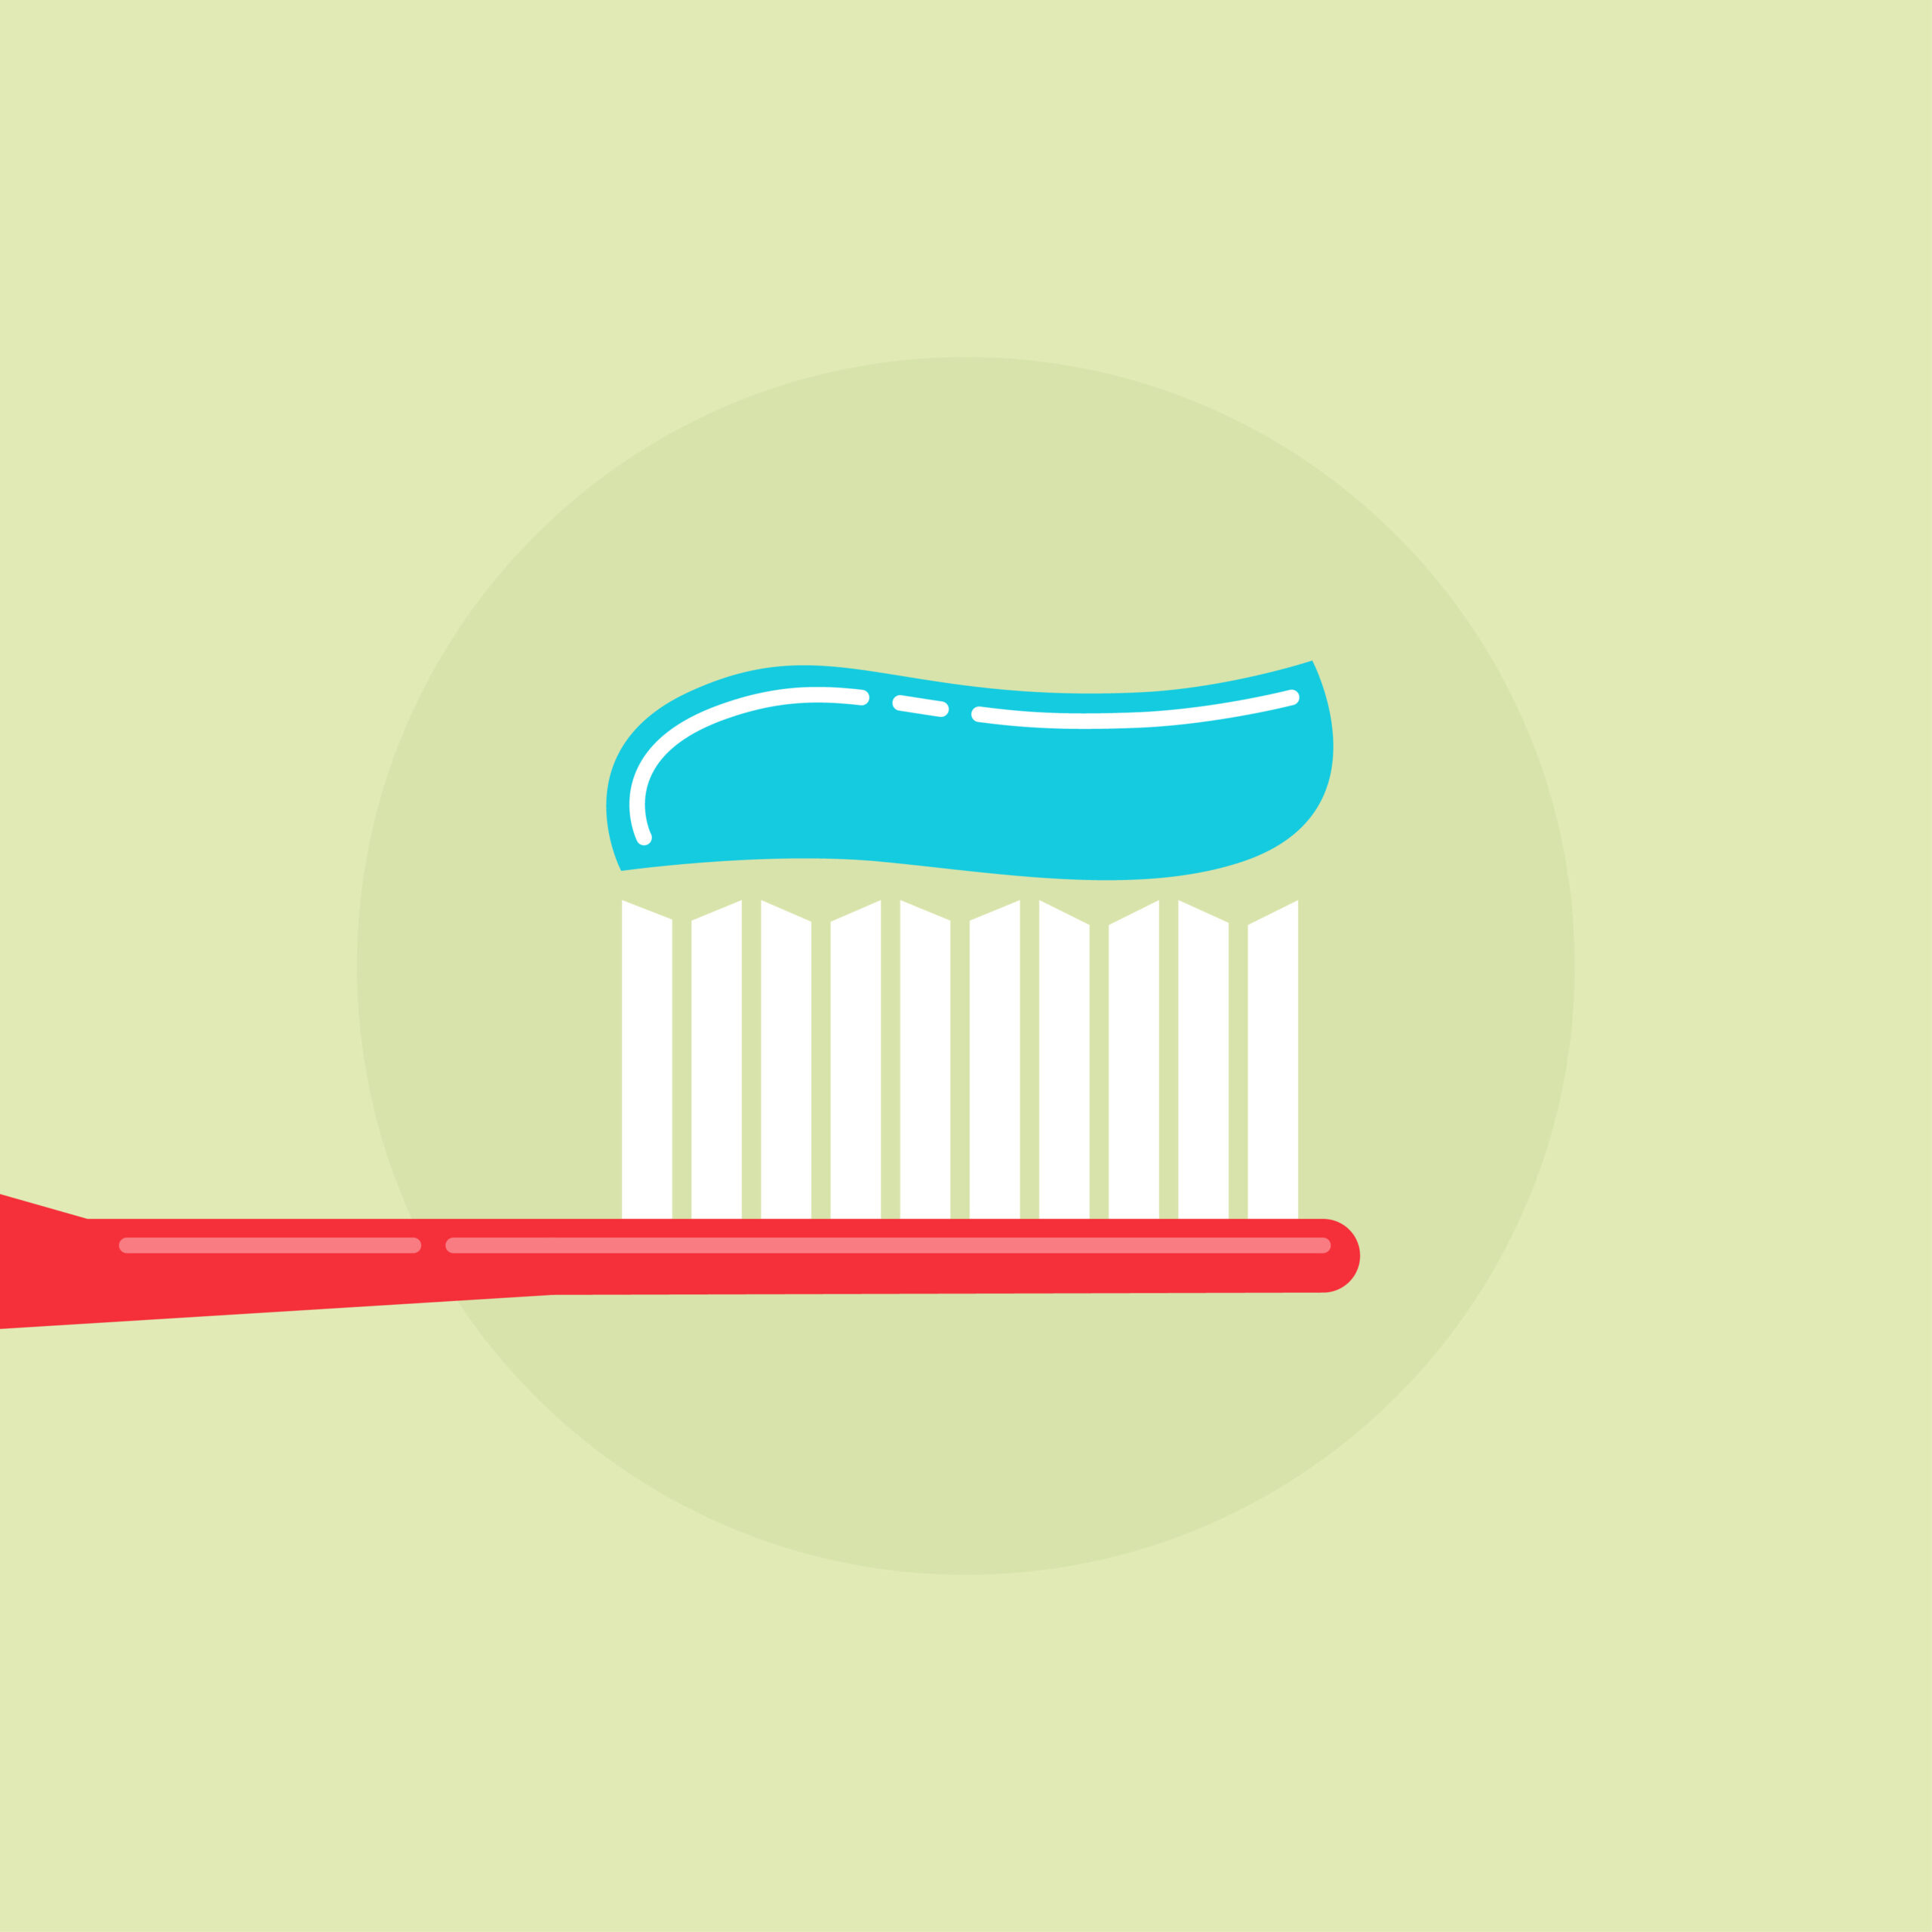 Toothbrush with toothpaste vector illustration, red tooth brush and blue tooth paste simple flat modern design isolated